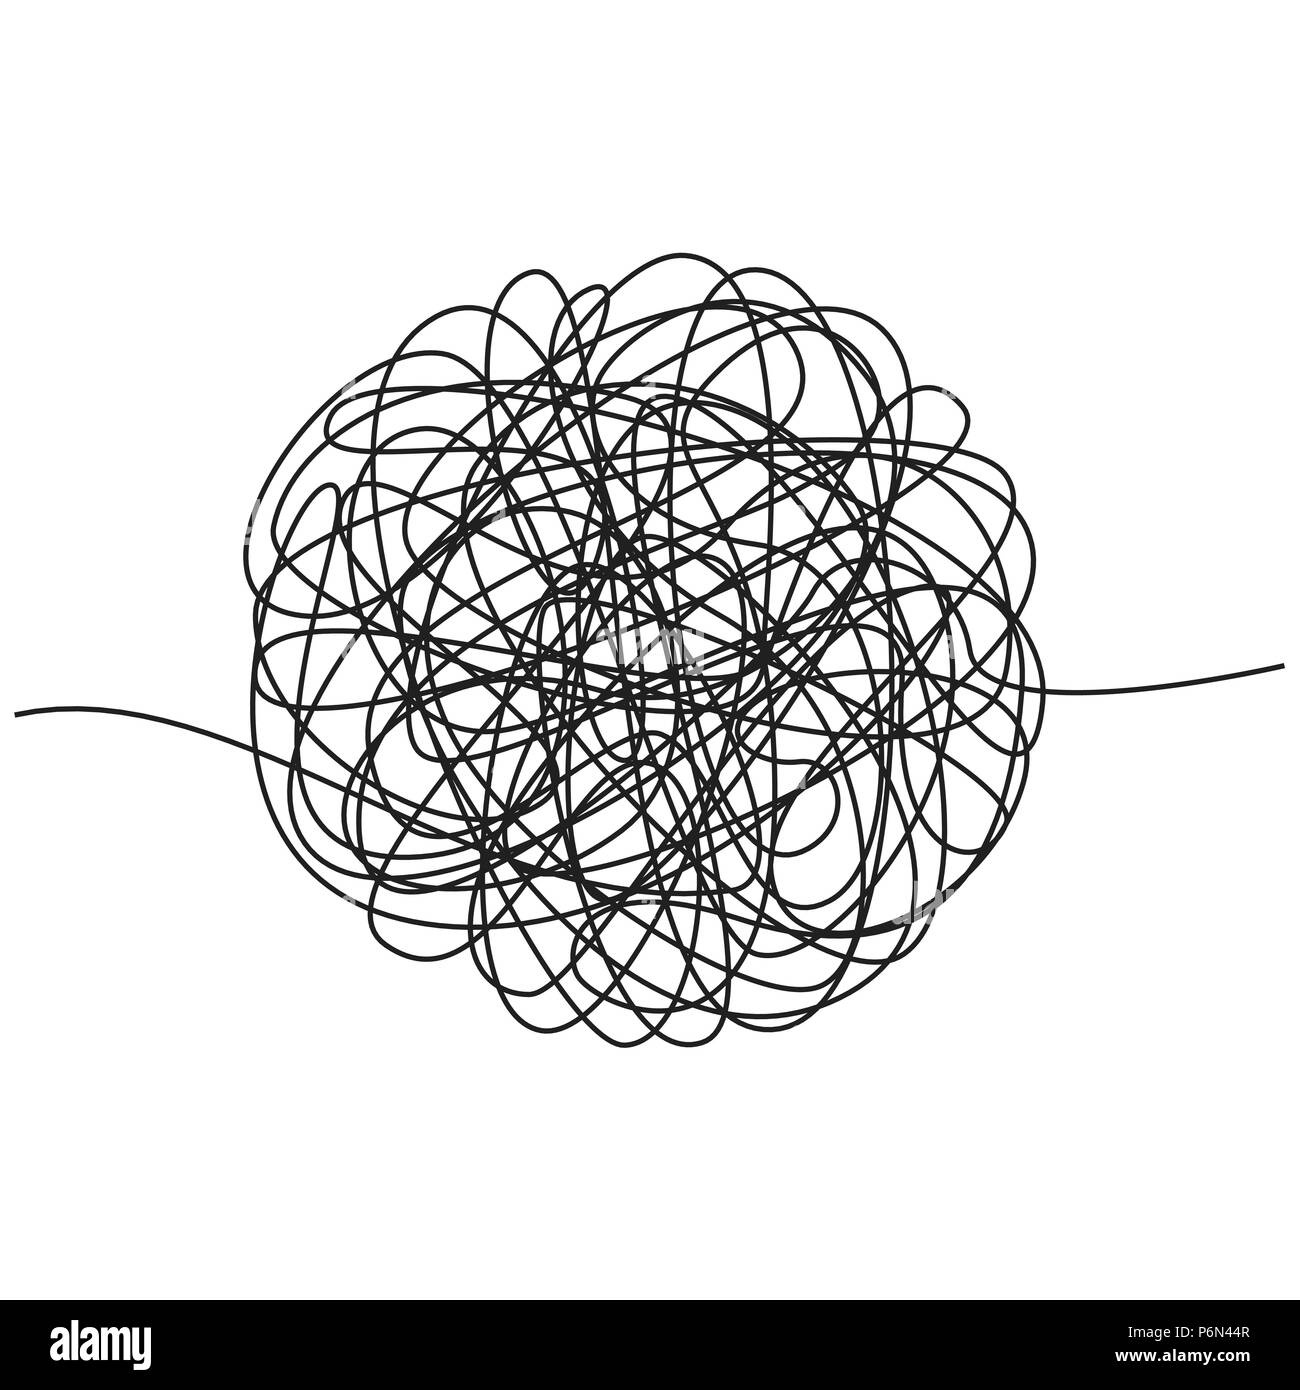 Hand drawn tangle of tangled thread. Sketch spherical abstract scribble shape. Chaotic black line doodle. Vector illustration isolated on white backgr Stock Vector